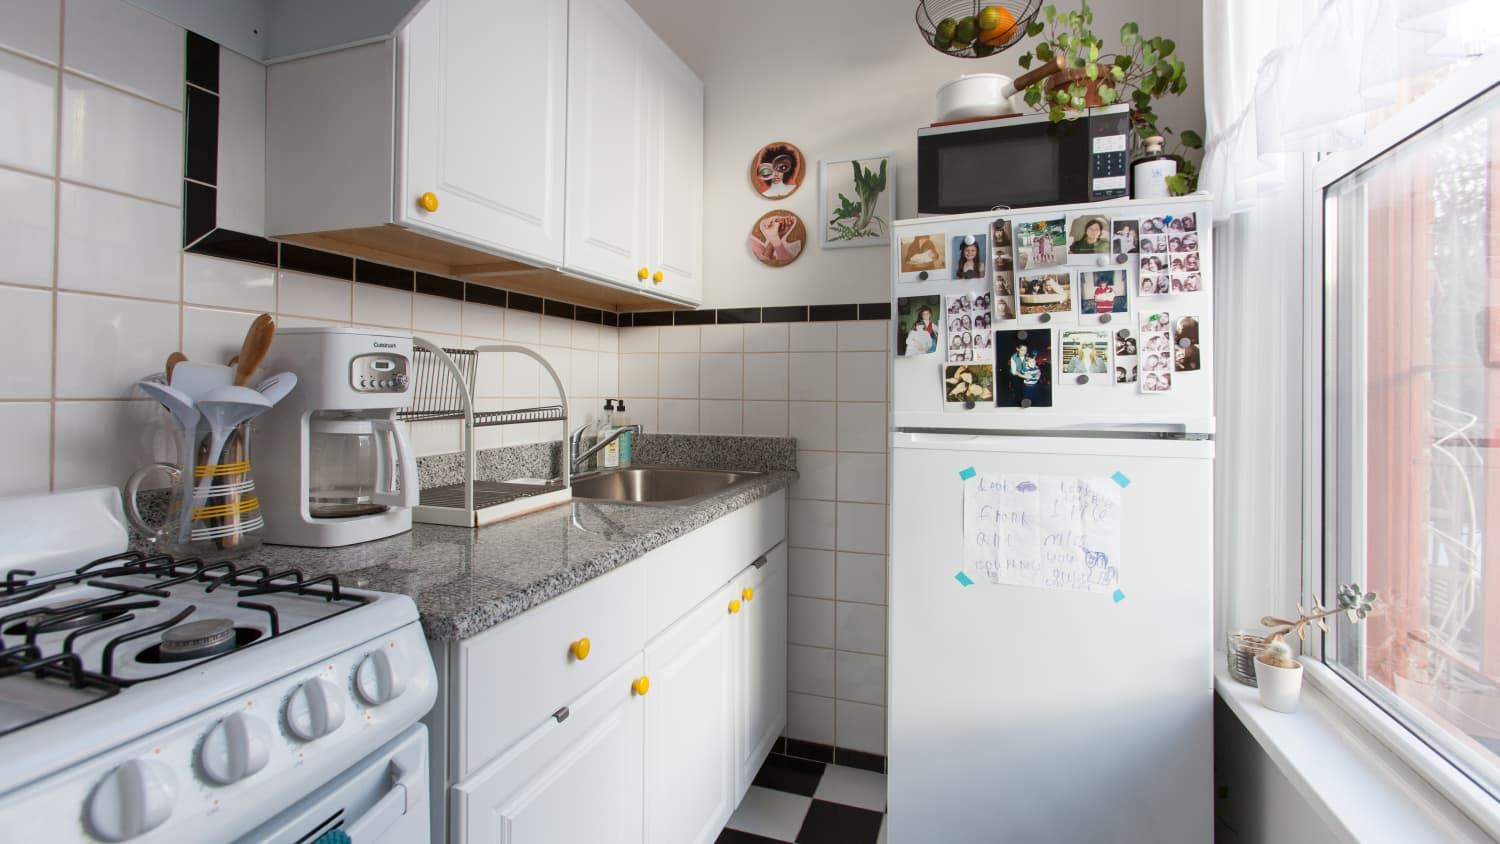 30 Ways to Maximize Space in Your Tiny Kitchen